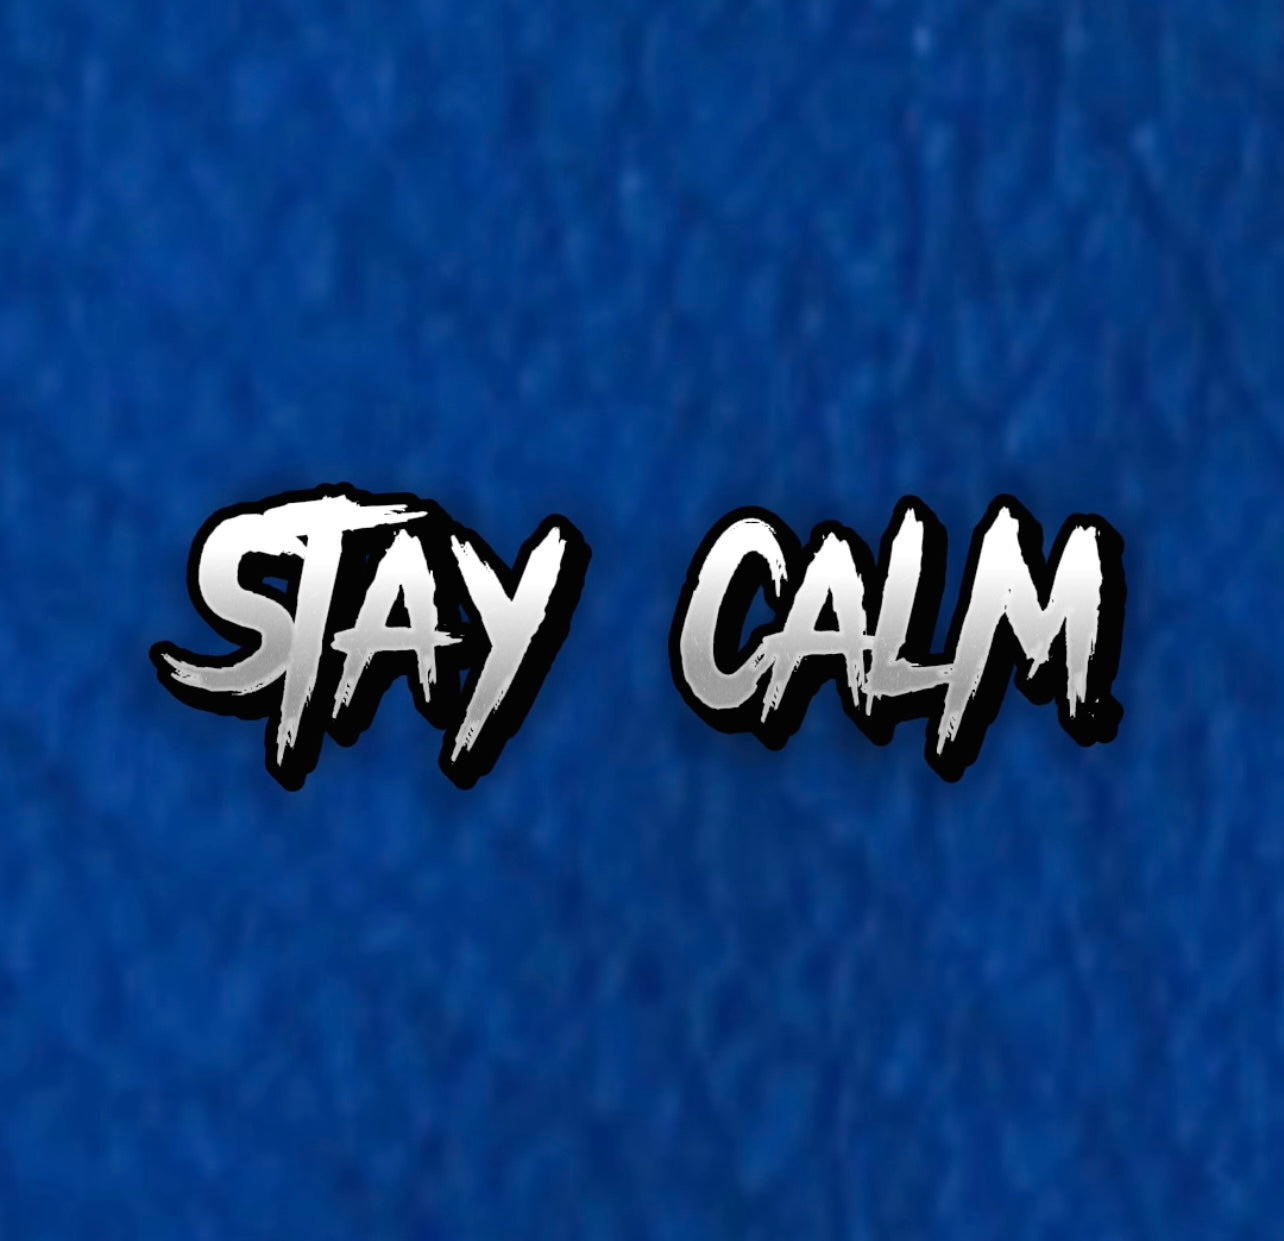 "Stay Calm" Hydro Liner